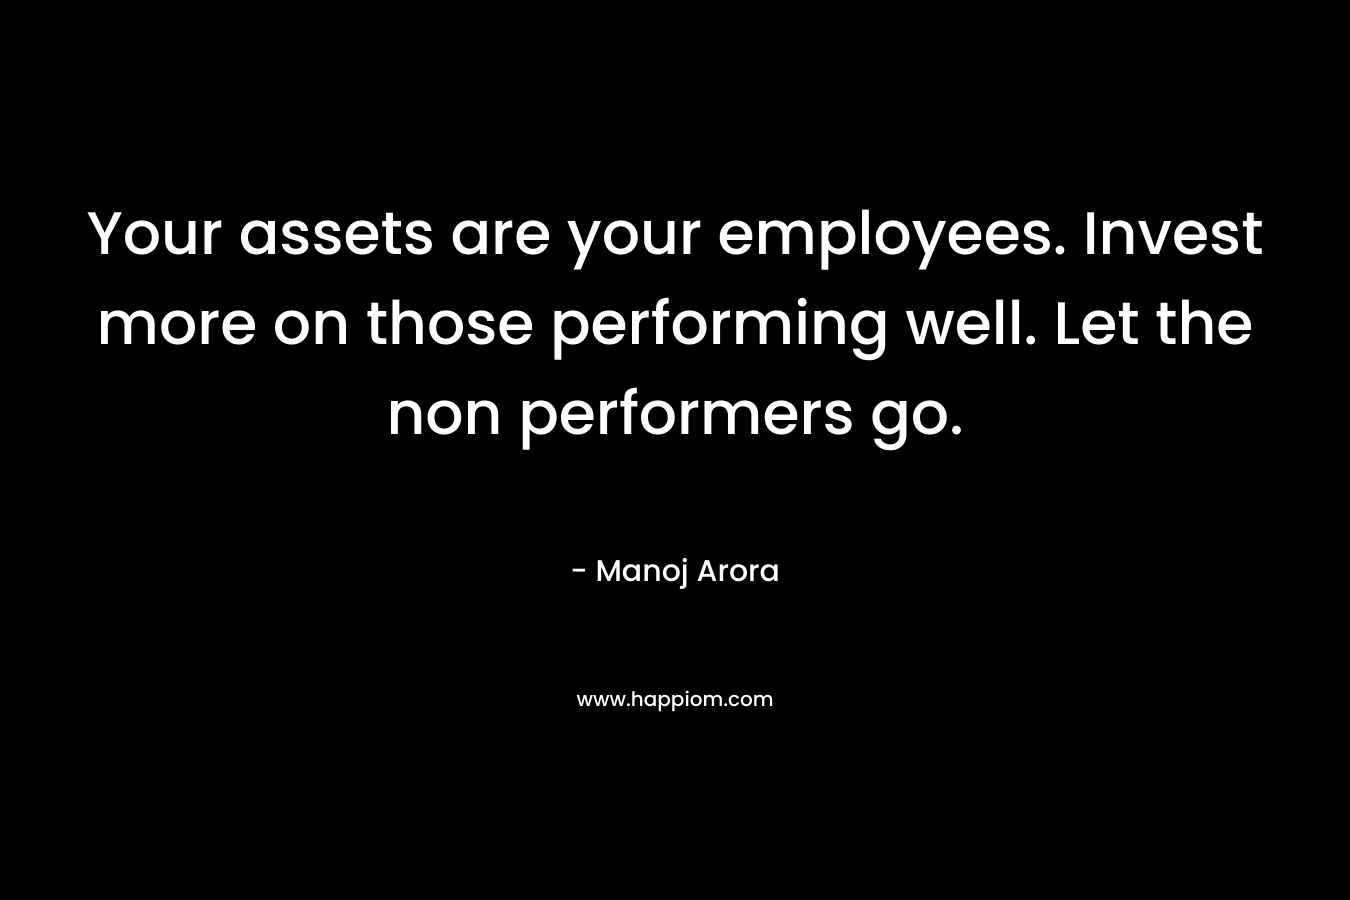 Your assets are your employees. Invest more on those performing well. Let the non performers go. – Manoj Arora